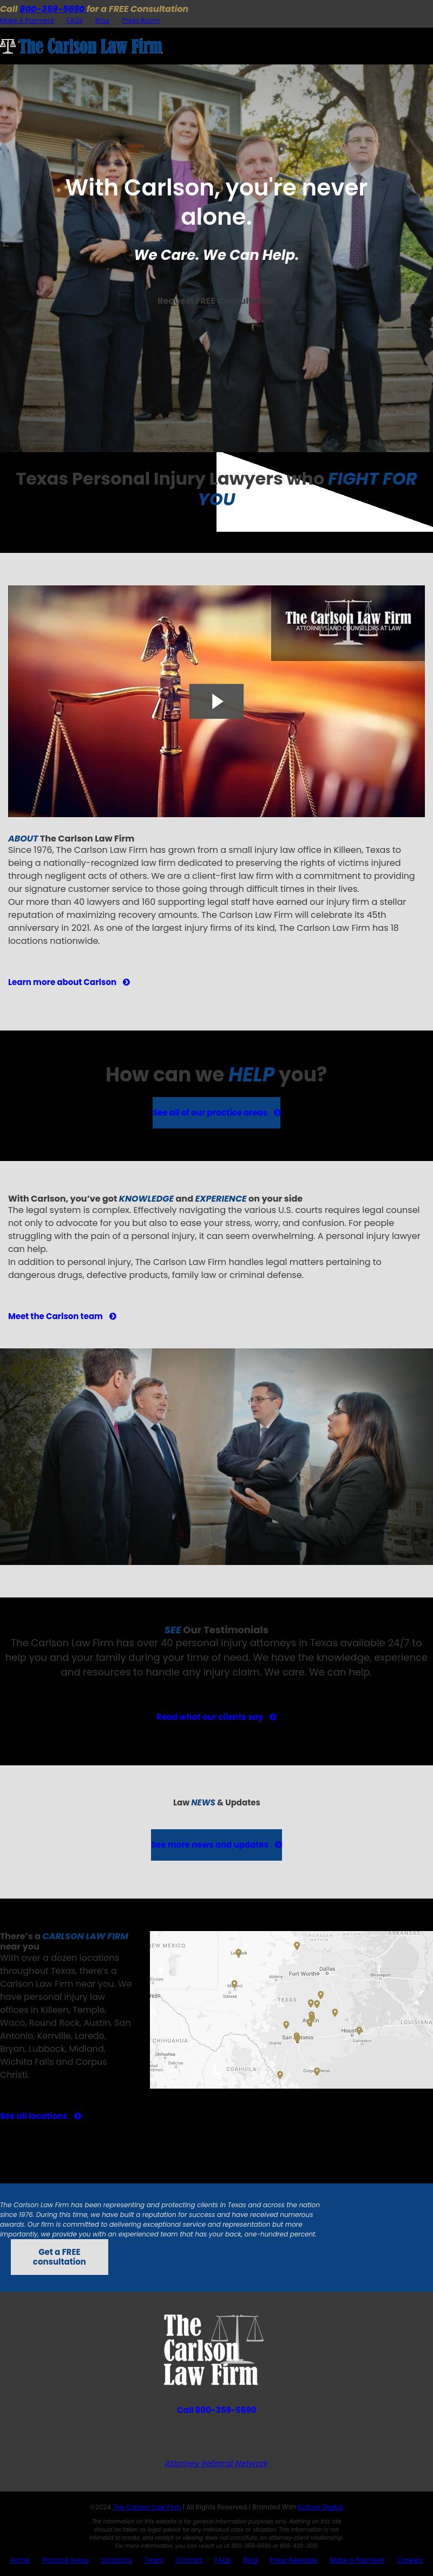 The Carlson Law Firm - Georgetown TX Lawyers